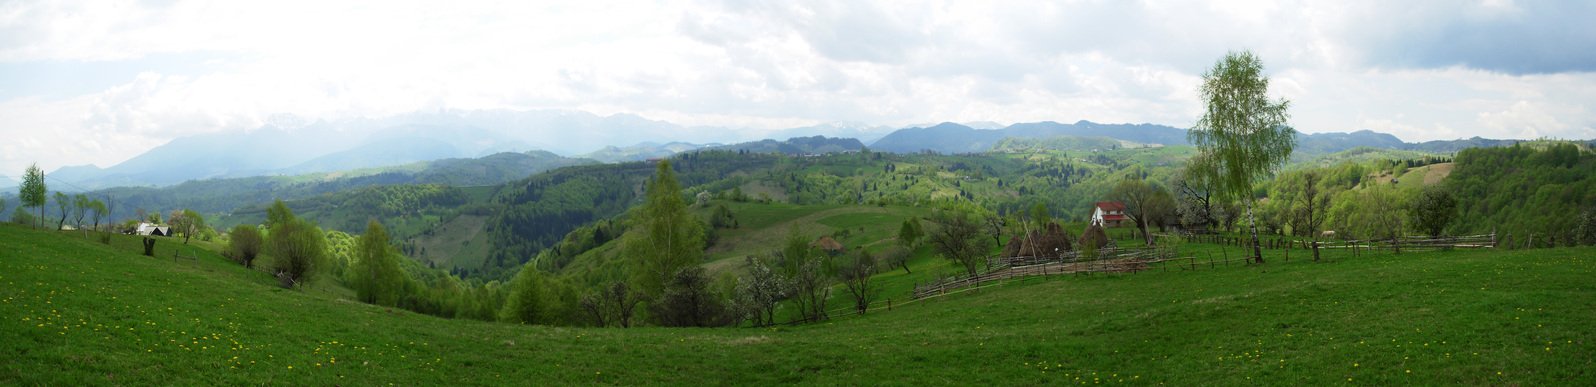 grassy hill with many trees and mountains in the background